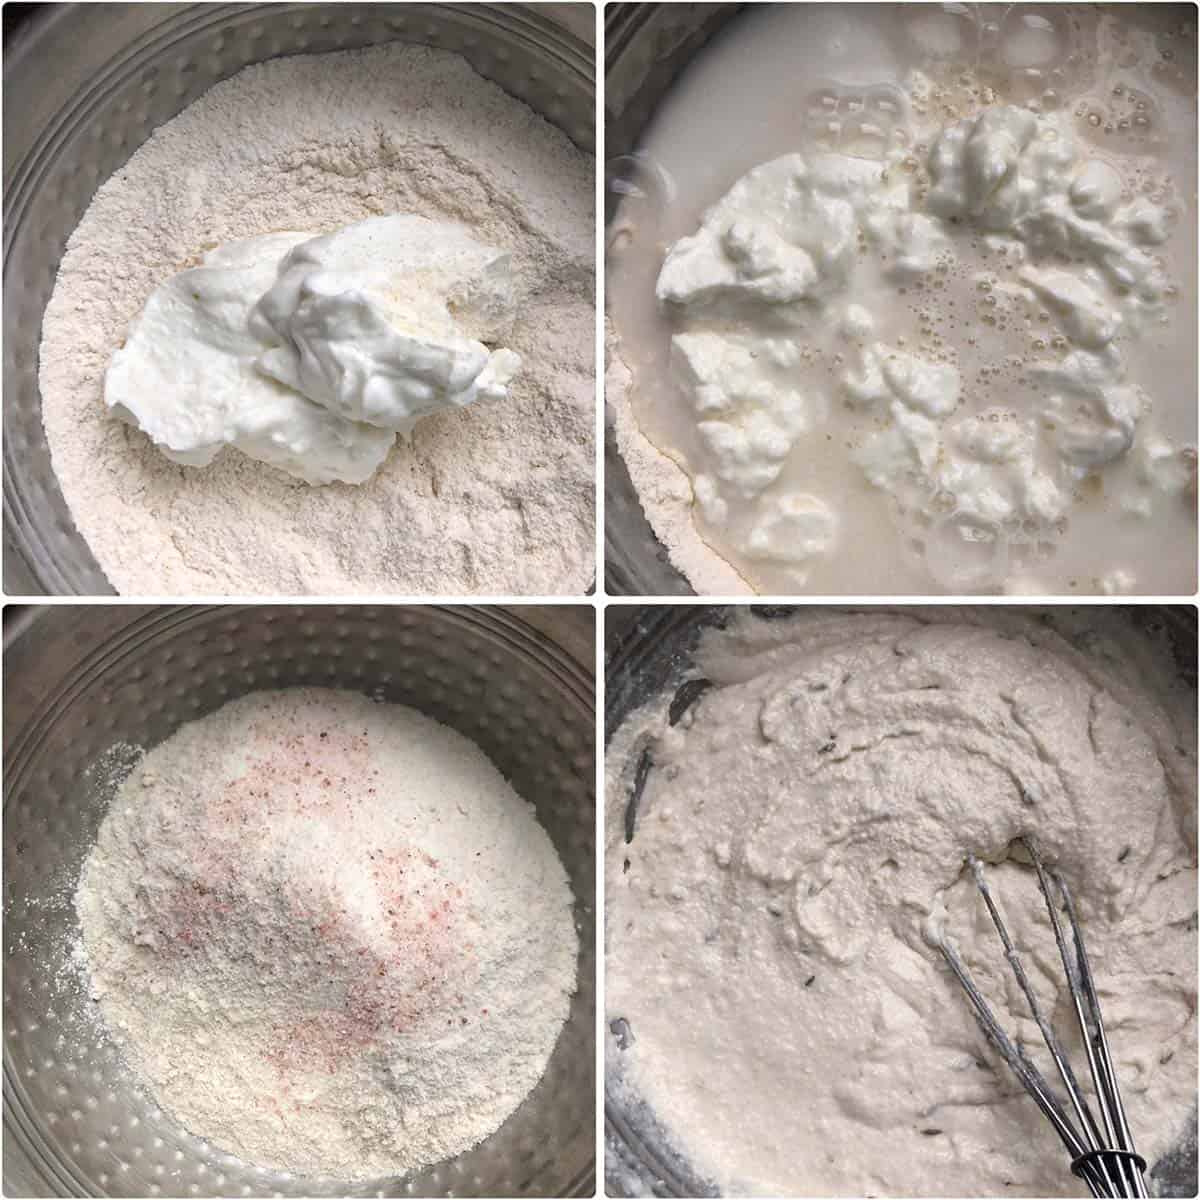 Mixing wet and dry ingredients in a mixing bowl